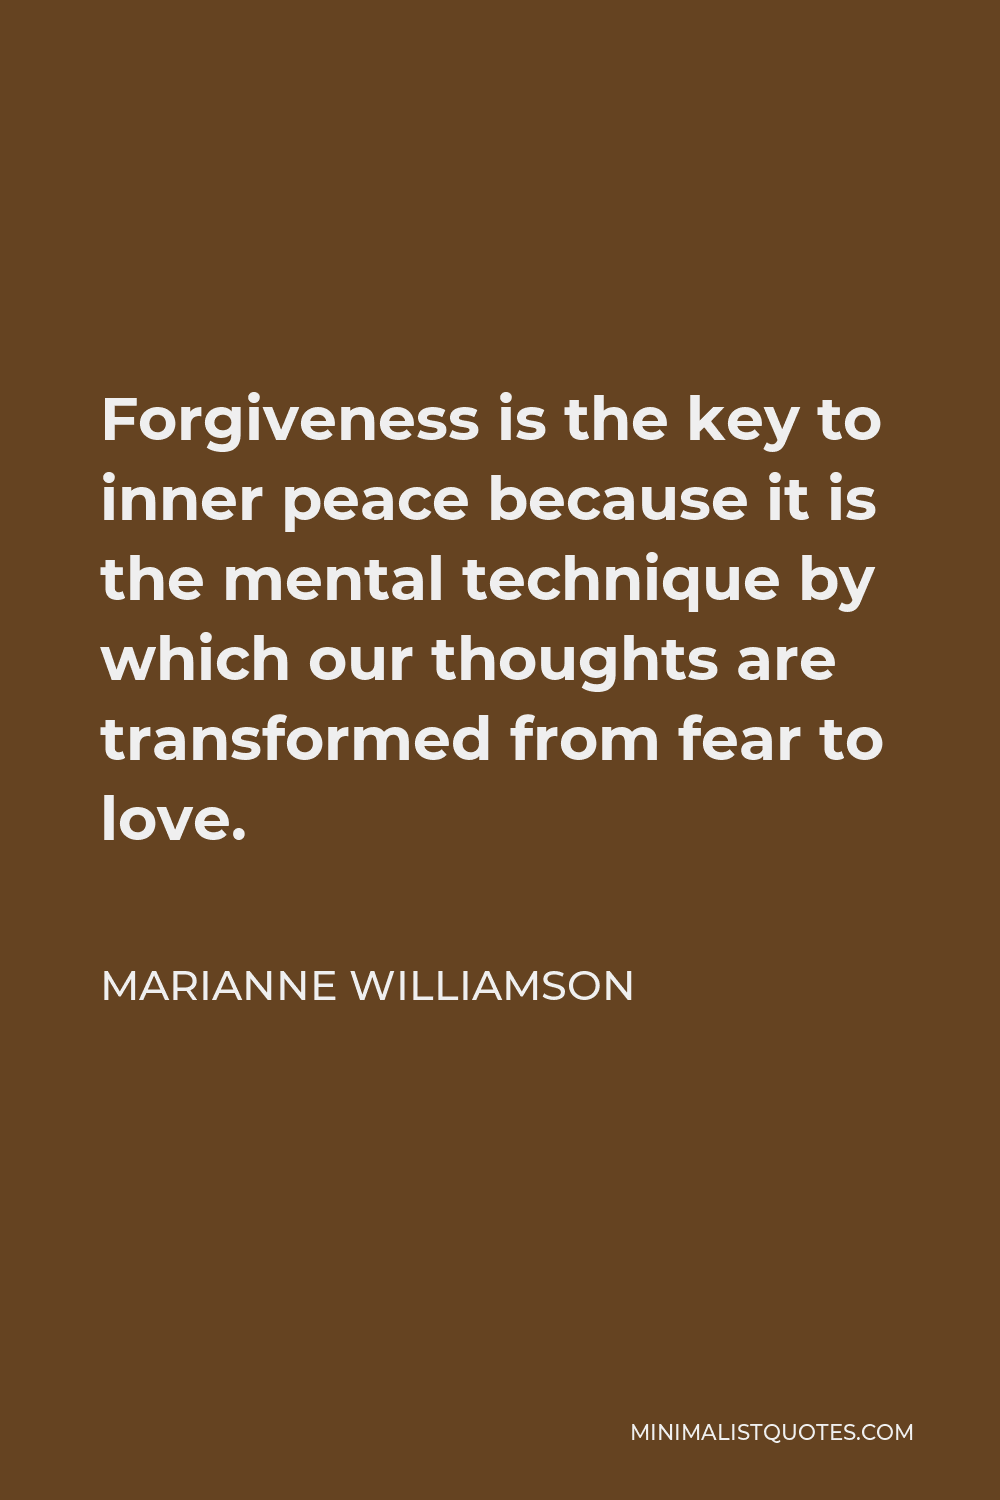 Marianne Williamson Quote - Forgiveness is the key to inner peace because it is the mental technique by which our thoughts are transformed from fear to love.